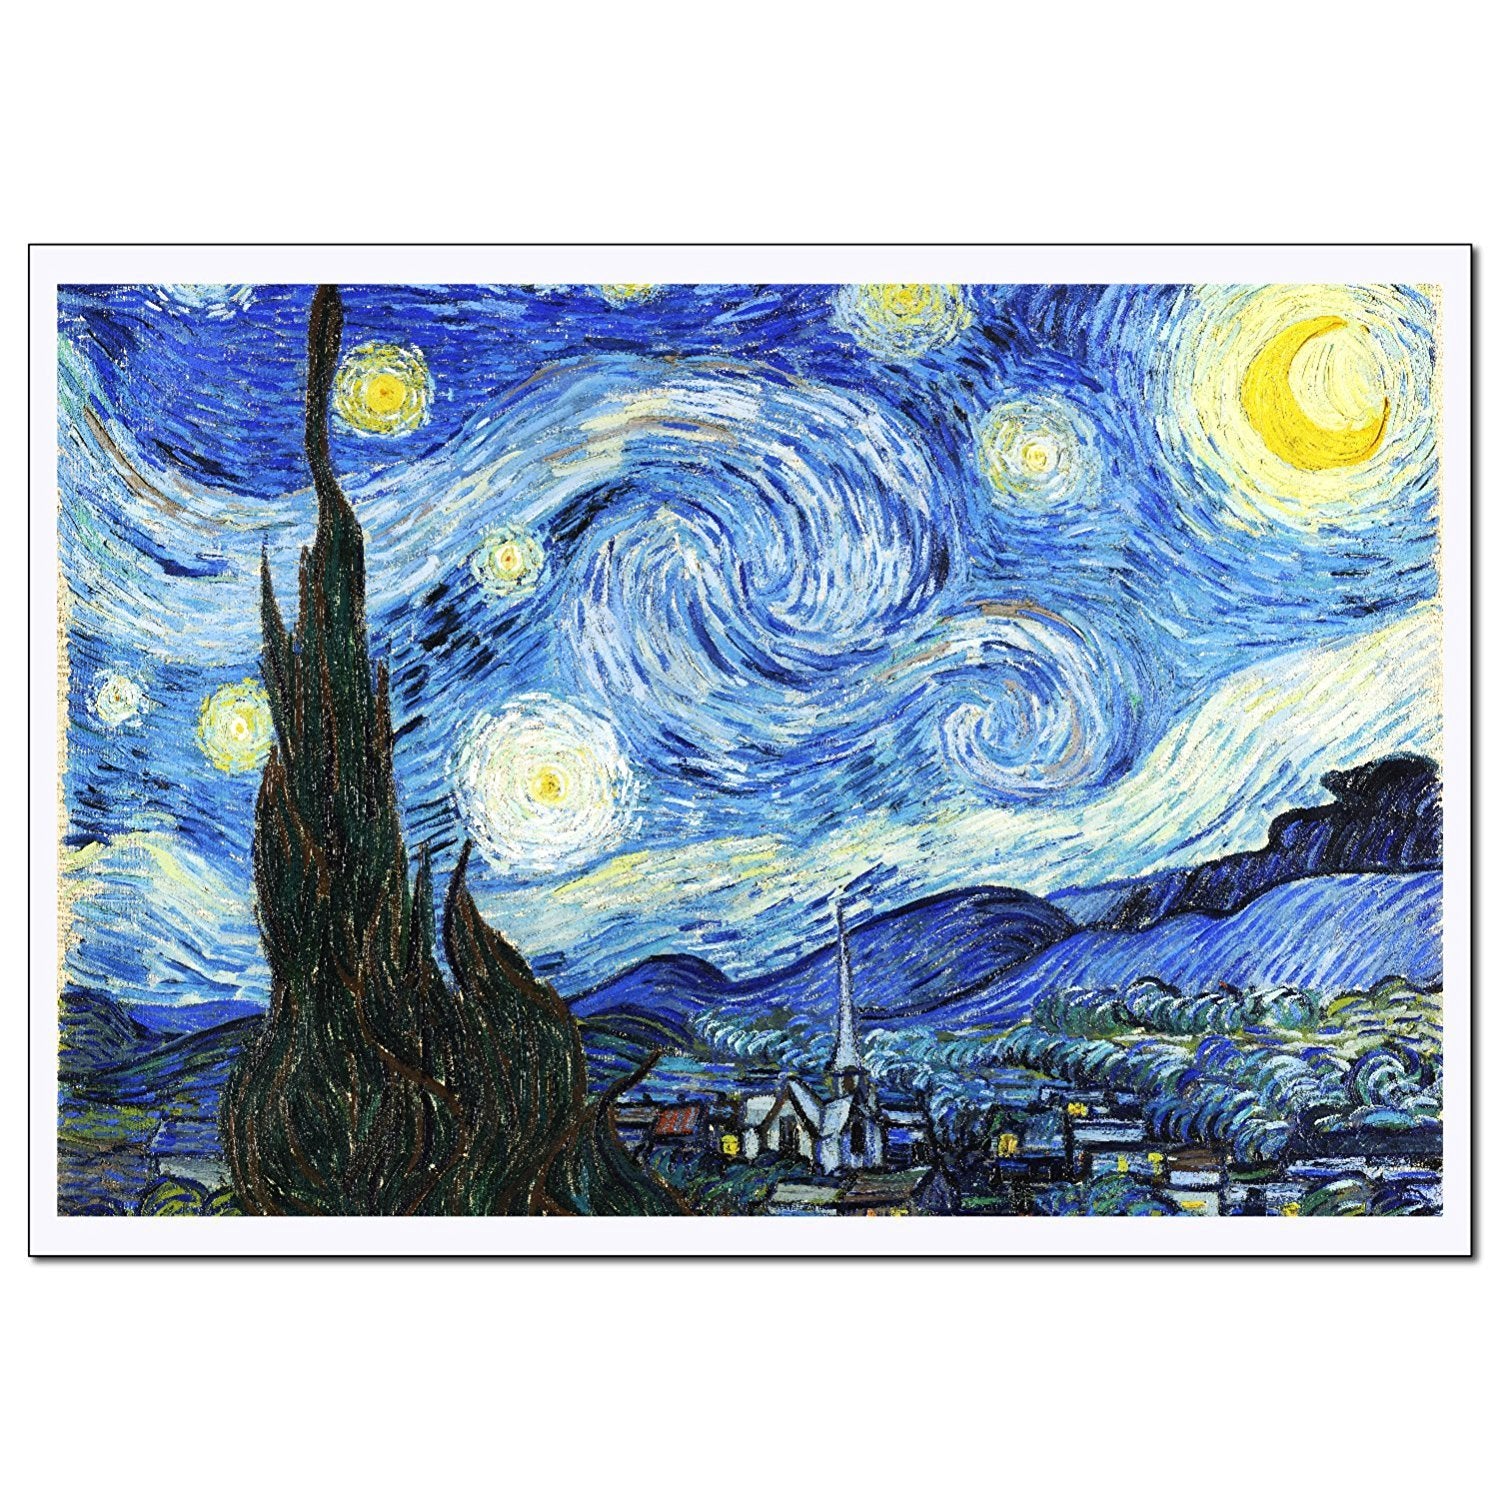 Starry Night by Van Gogh Wall Art Decoration-Oil Paint Reproduction - Young N' Refined